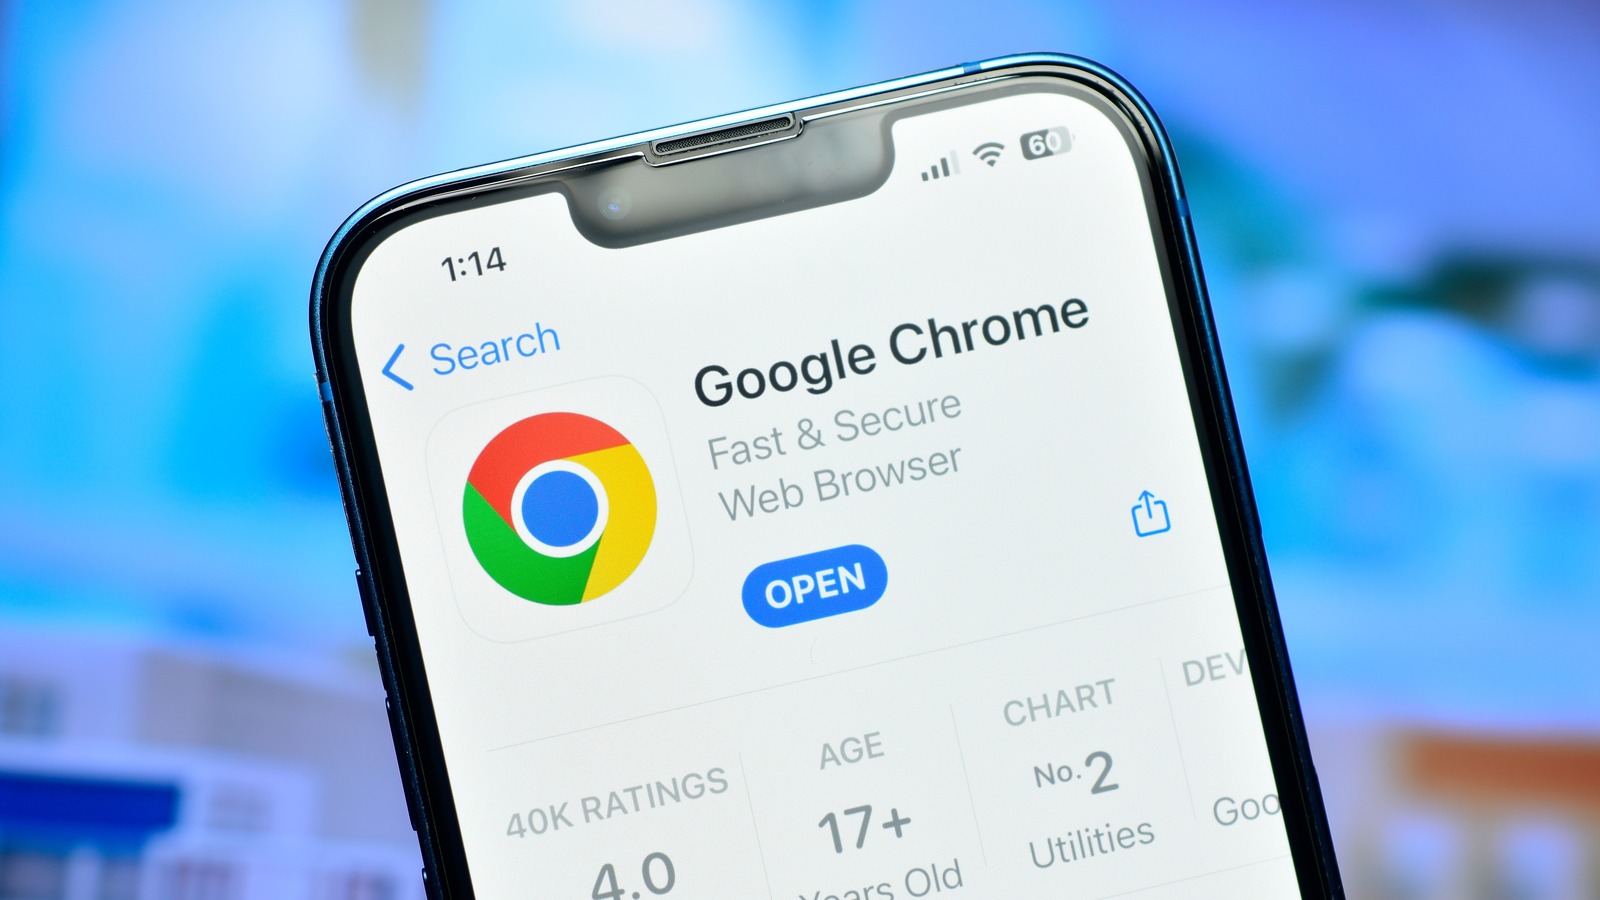 How To Change Your Default Search Engine On The Google Chrome App